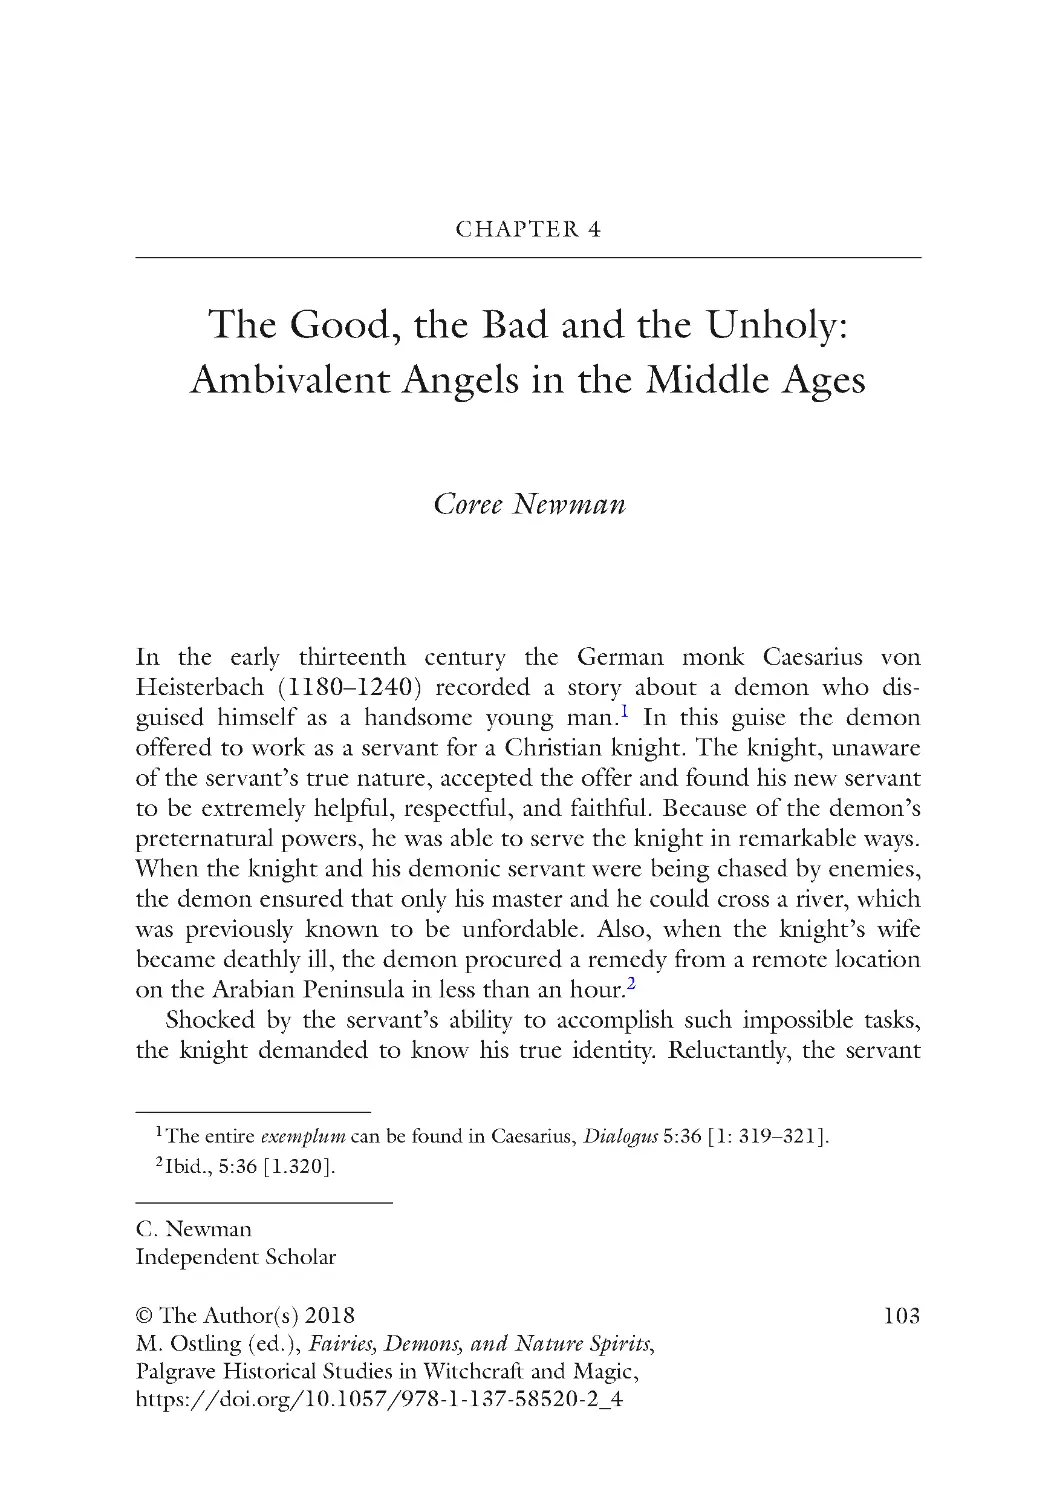 Chapter 4 The Good, the Bad and the Unholy: Ambivalent Angels in the Middle Ages